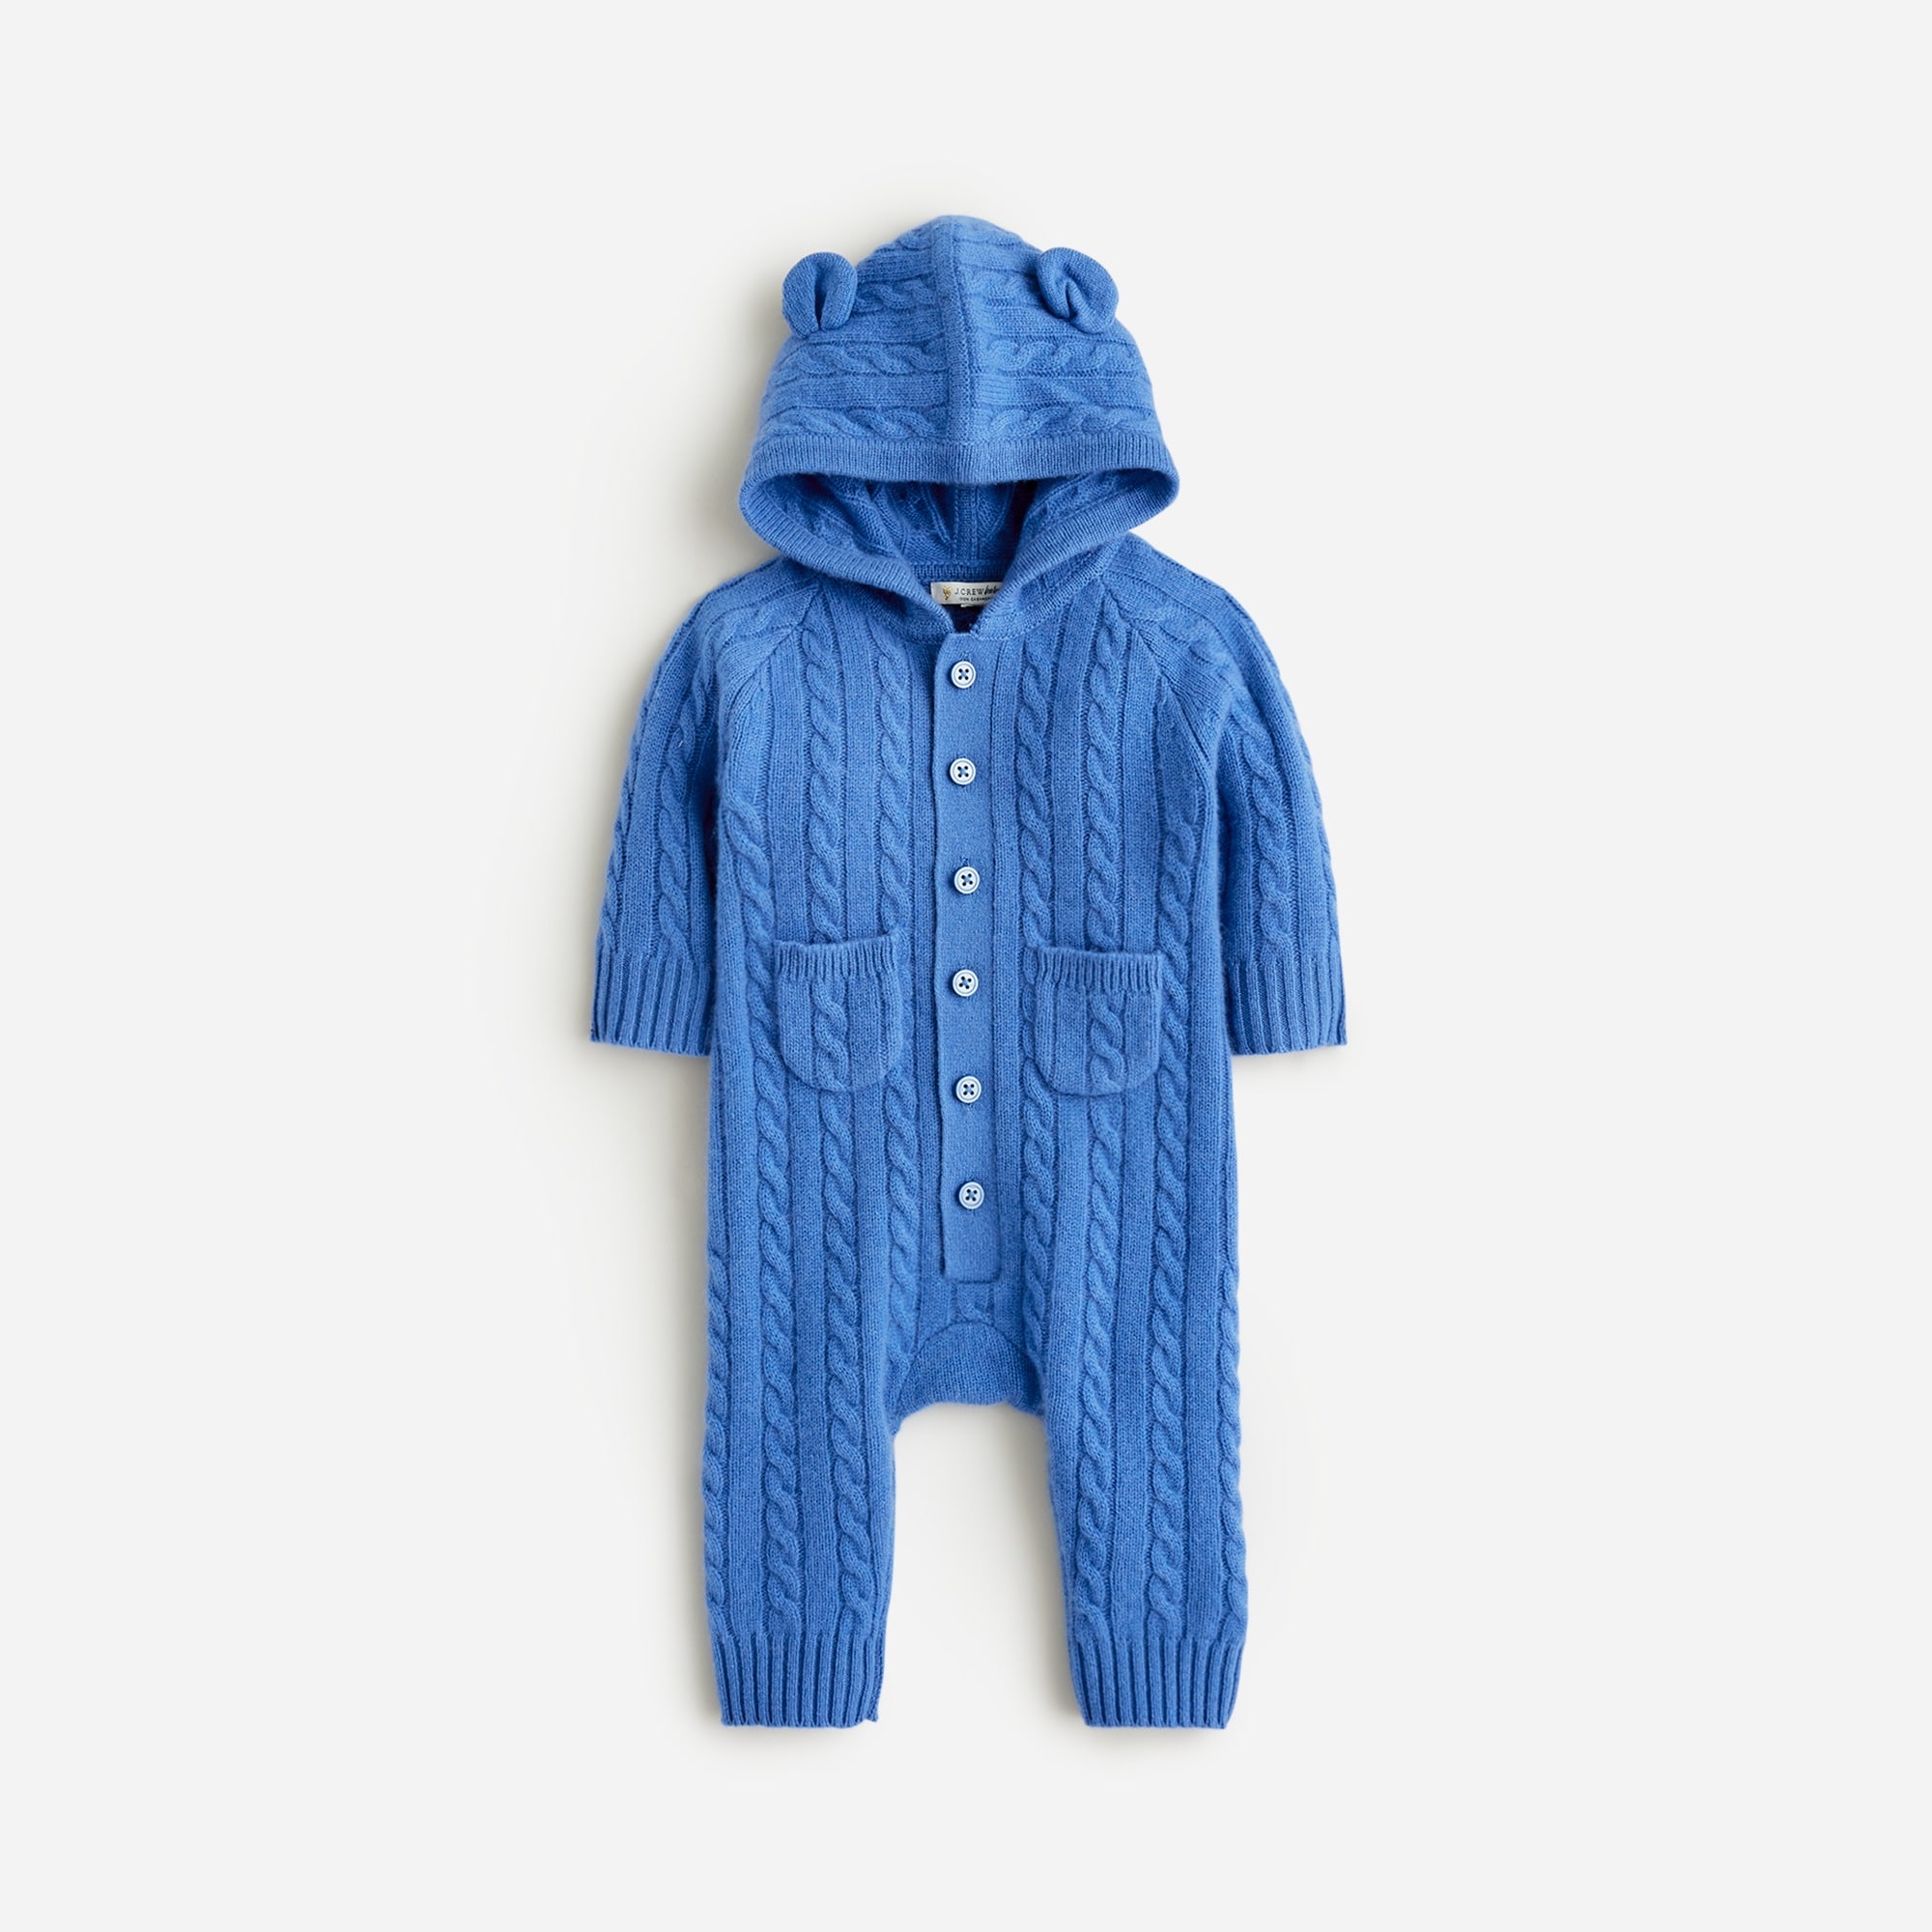 Jcrew Limited-edition baby cashmere cable-knit bear one-piece